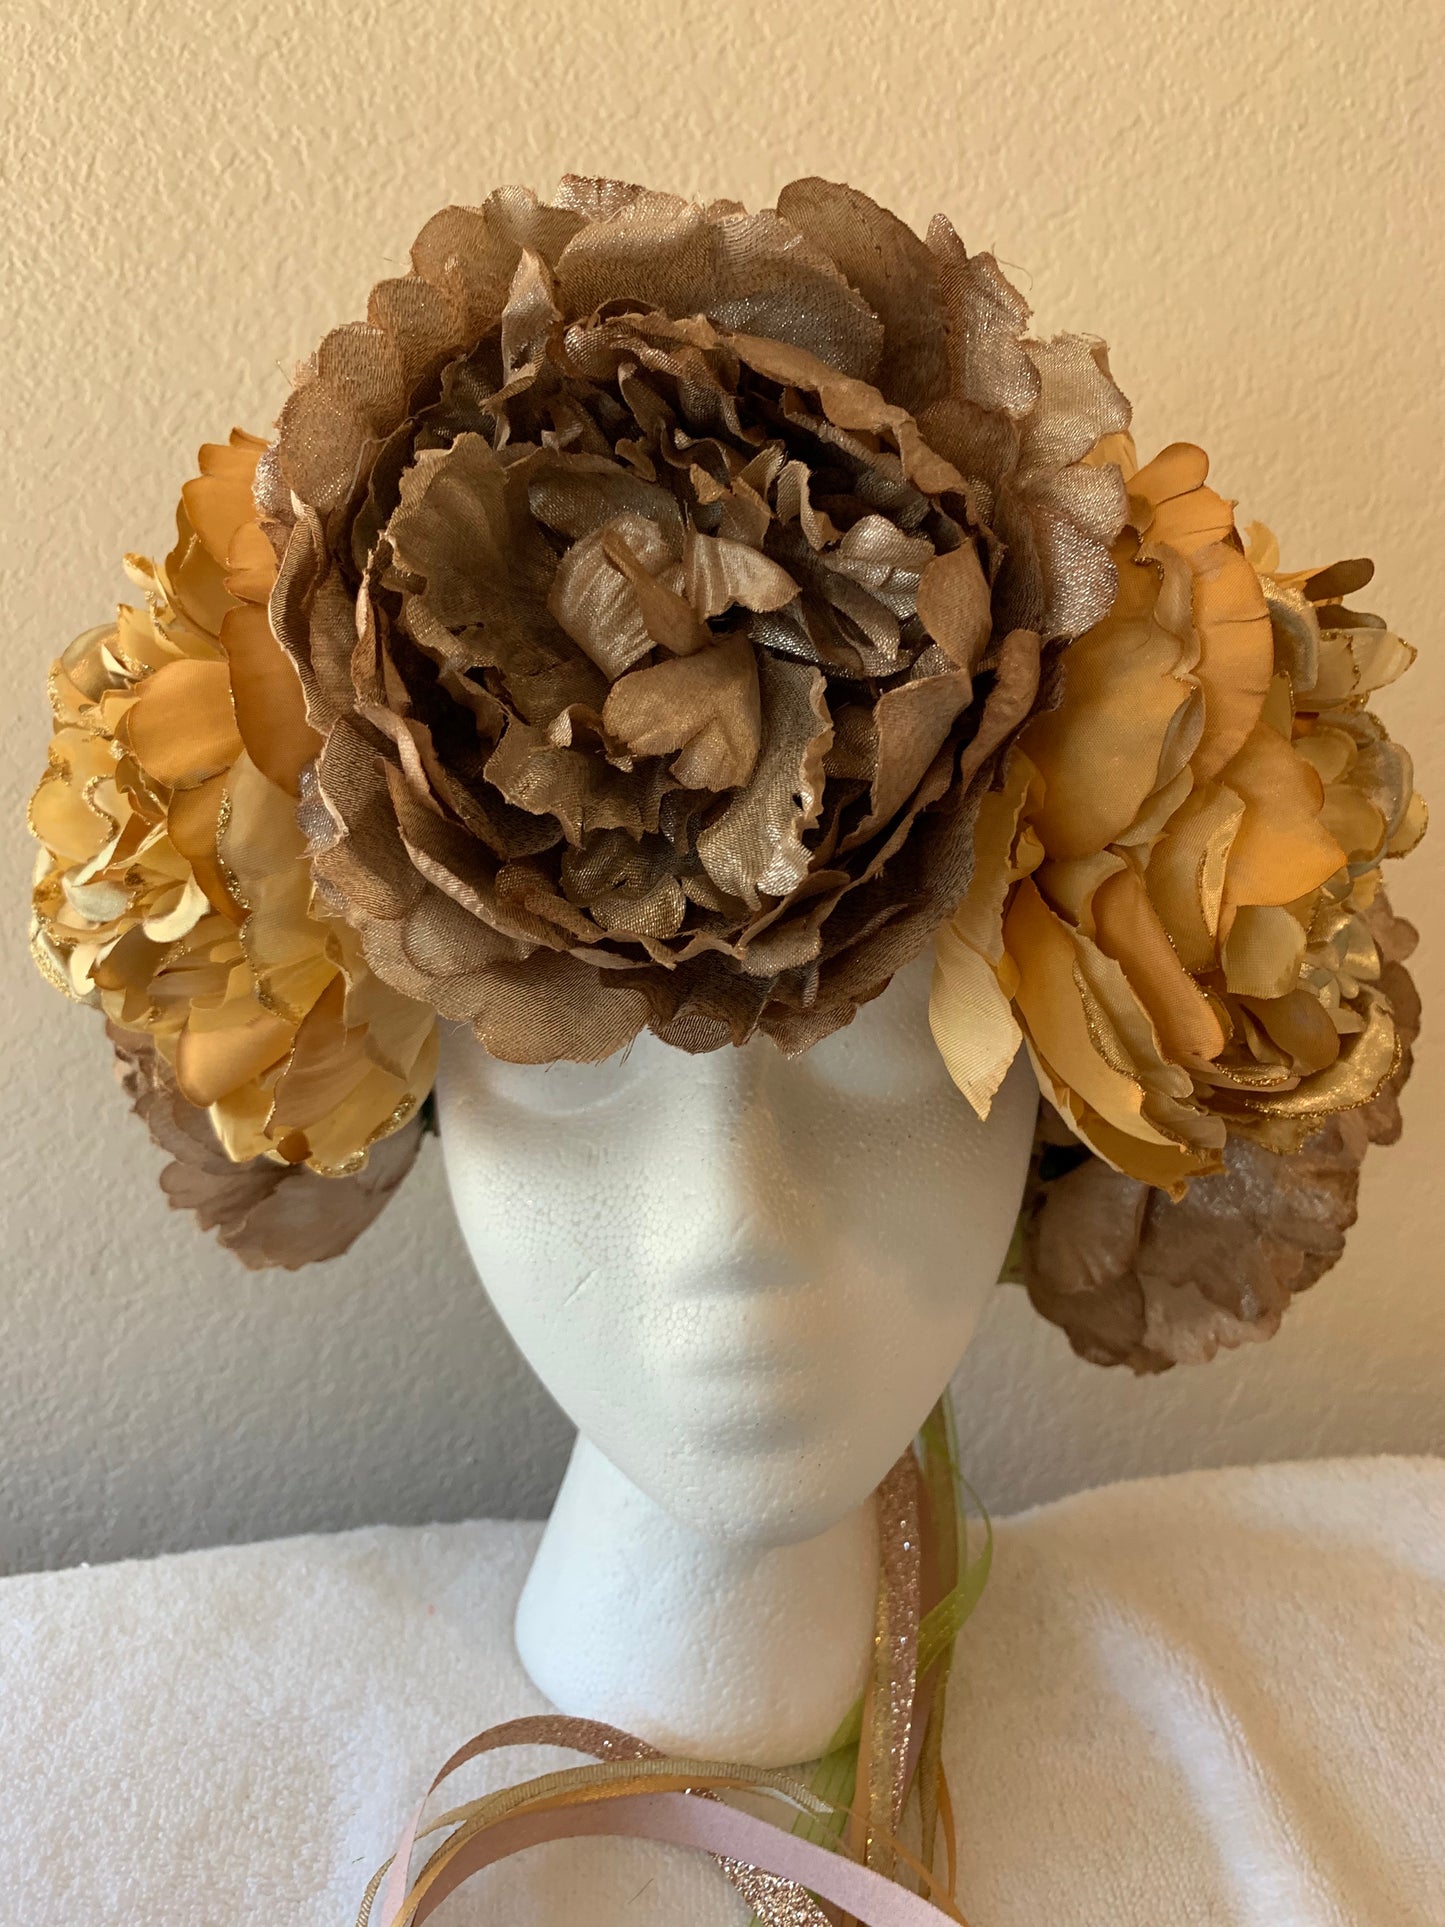 Extra Large Fantasy Wreath - Gold and Bronze Fluffy Flowers